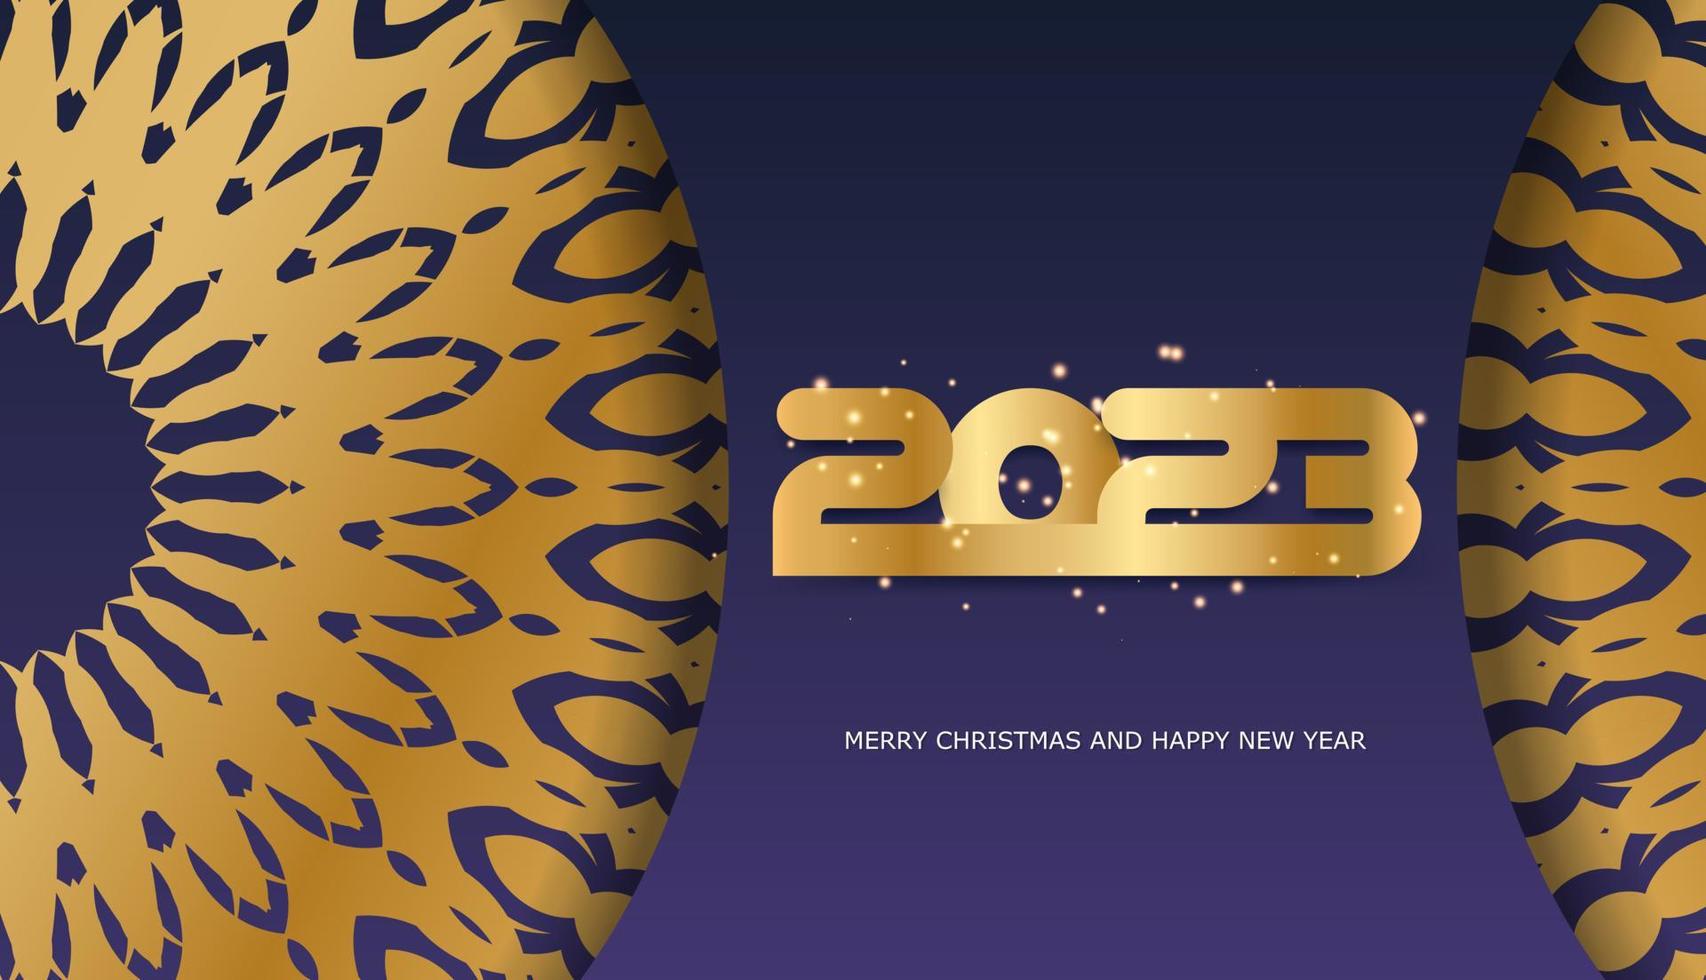 2023 happy new year greeting background. Golden pattern on Blue. vector